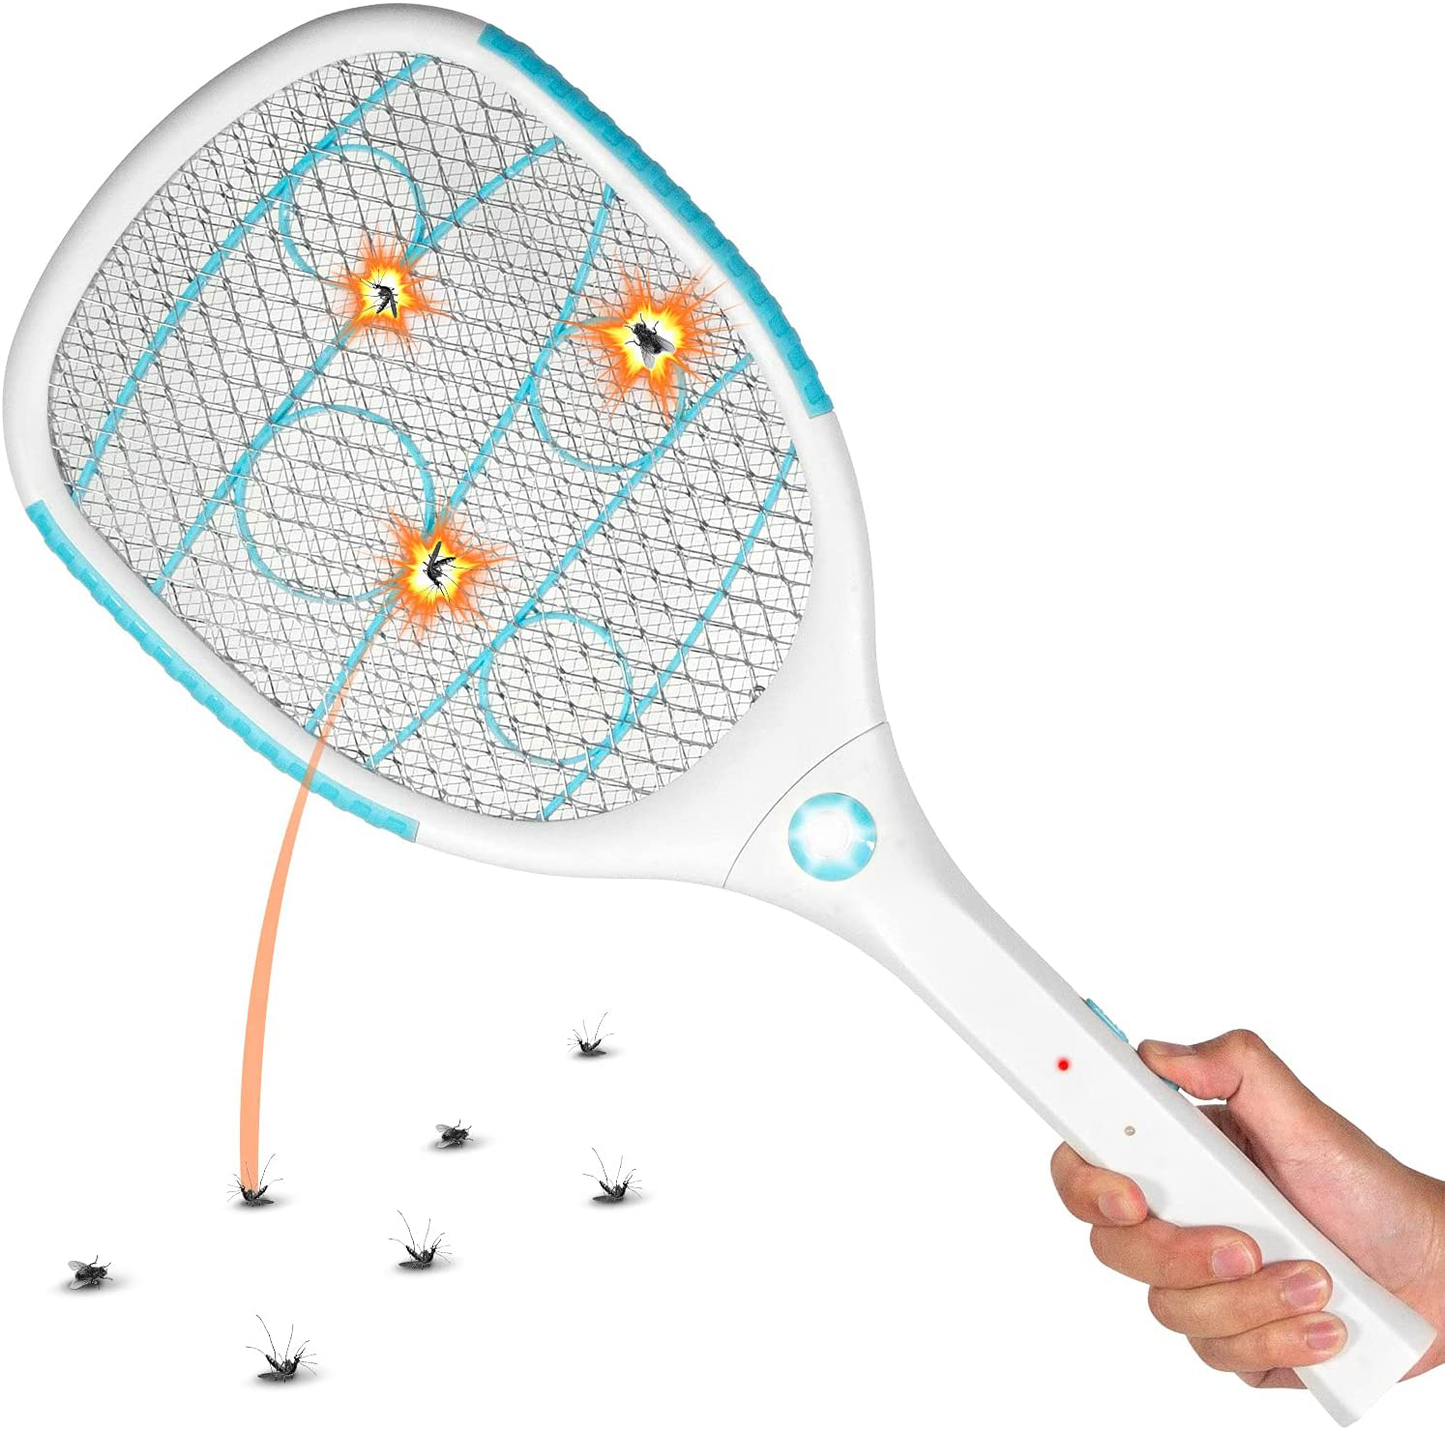 2PK of USB Rechargeable Electric Bug Zapper 3300V, Mosquito Killer Racket, Rechargeable Battery Powered Fly Swatter with LED Light for Flys, Bees, Mosquitoes and More (Blue)